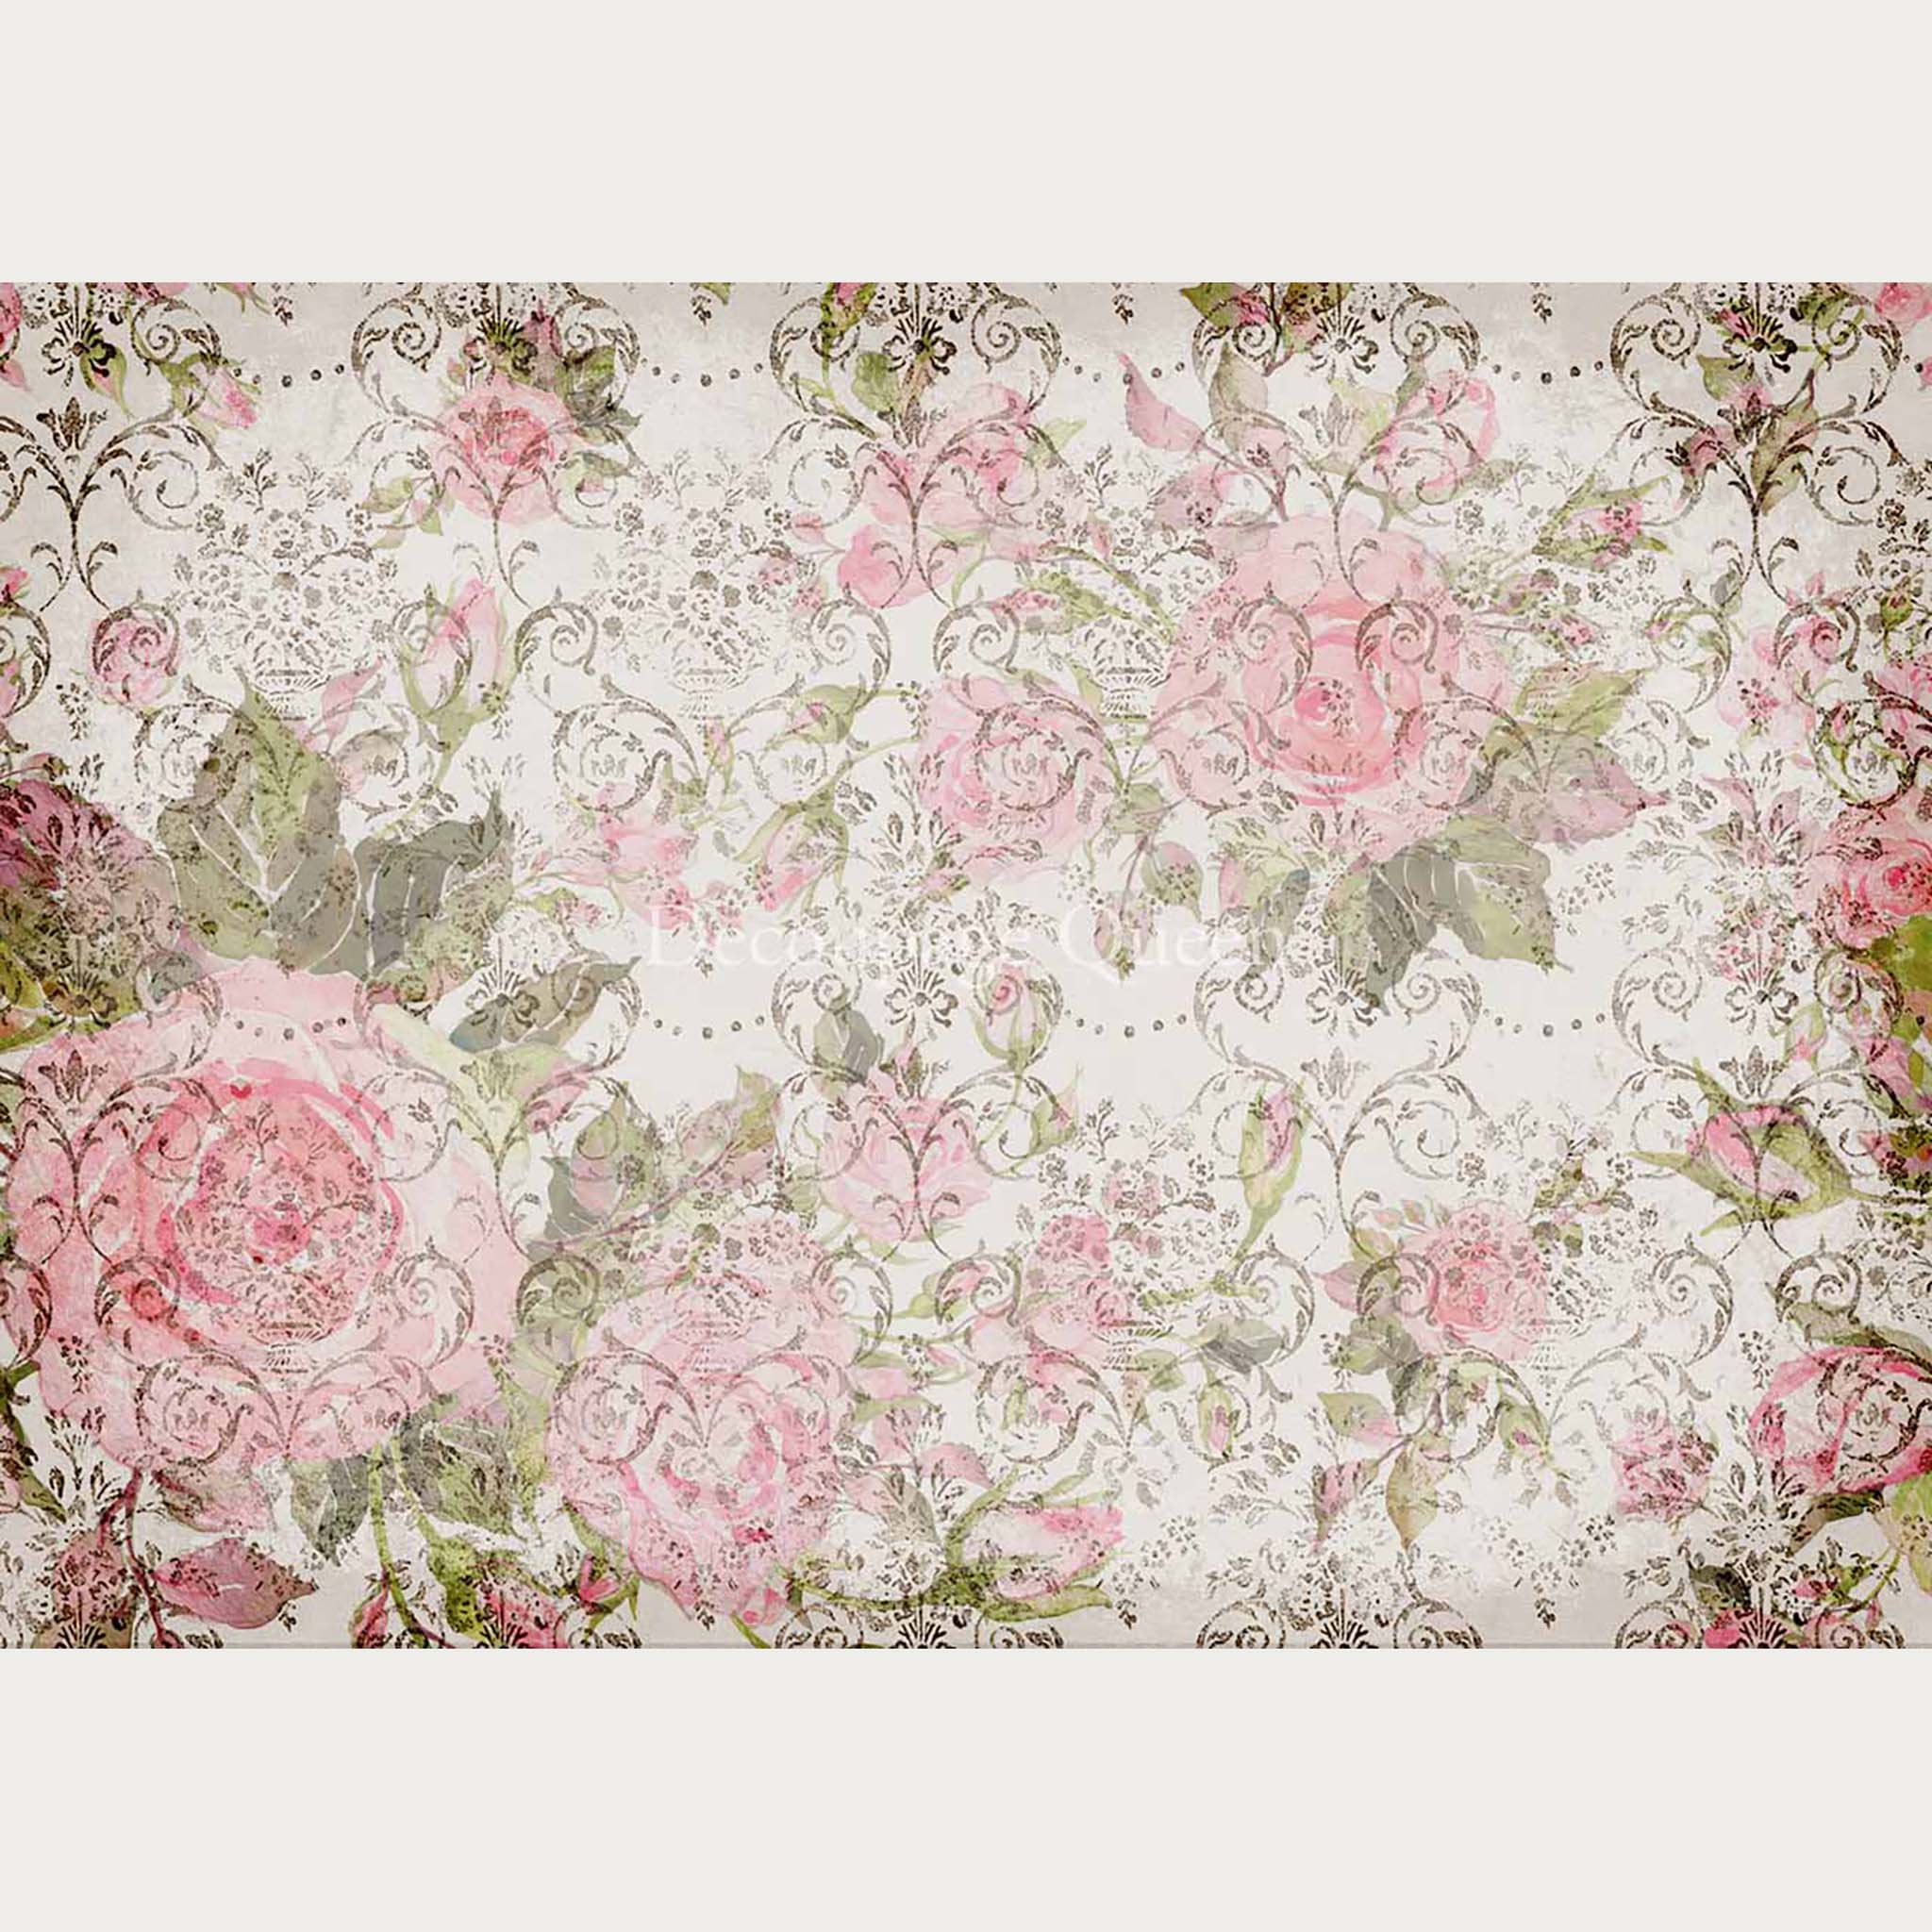 A3 rice paper design that features a repeating dark scroll pattern overlayed on large faded pink roses. White borders are on the top and bottom.